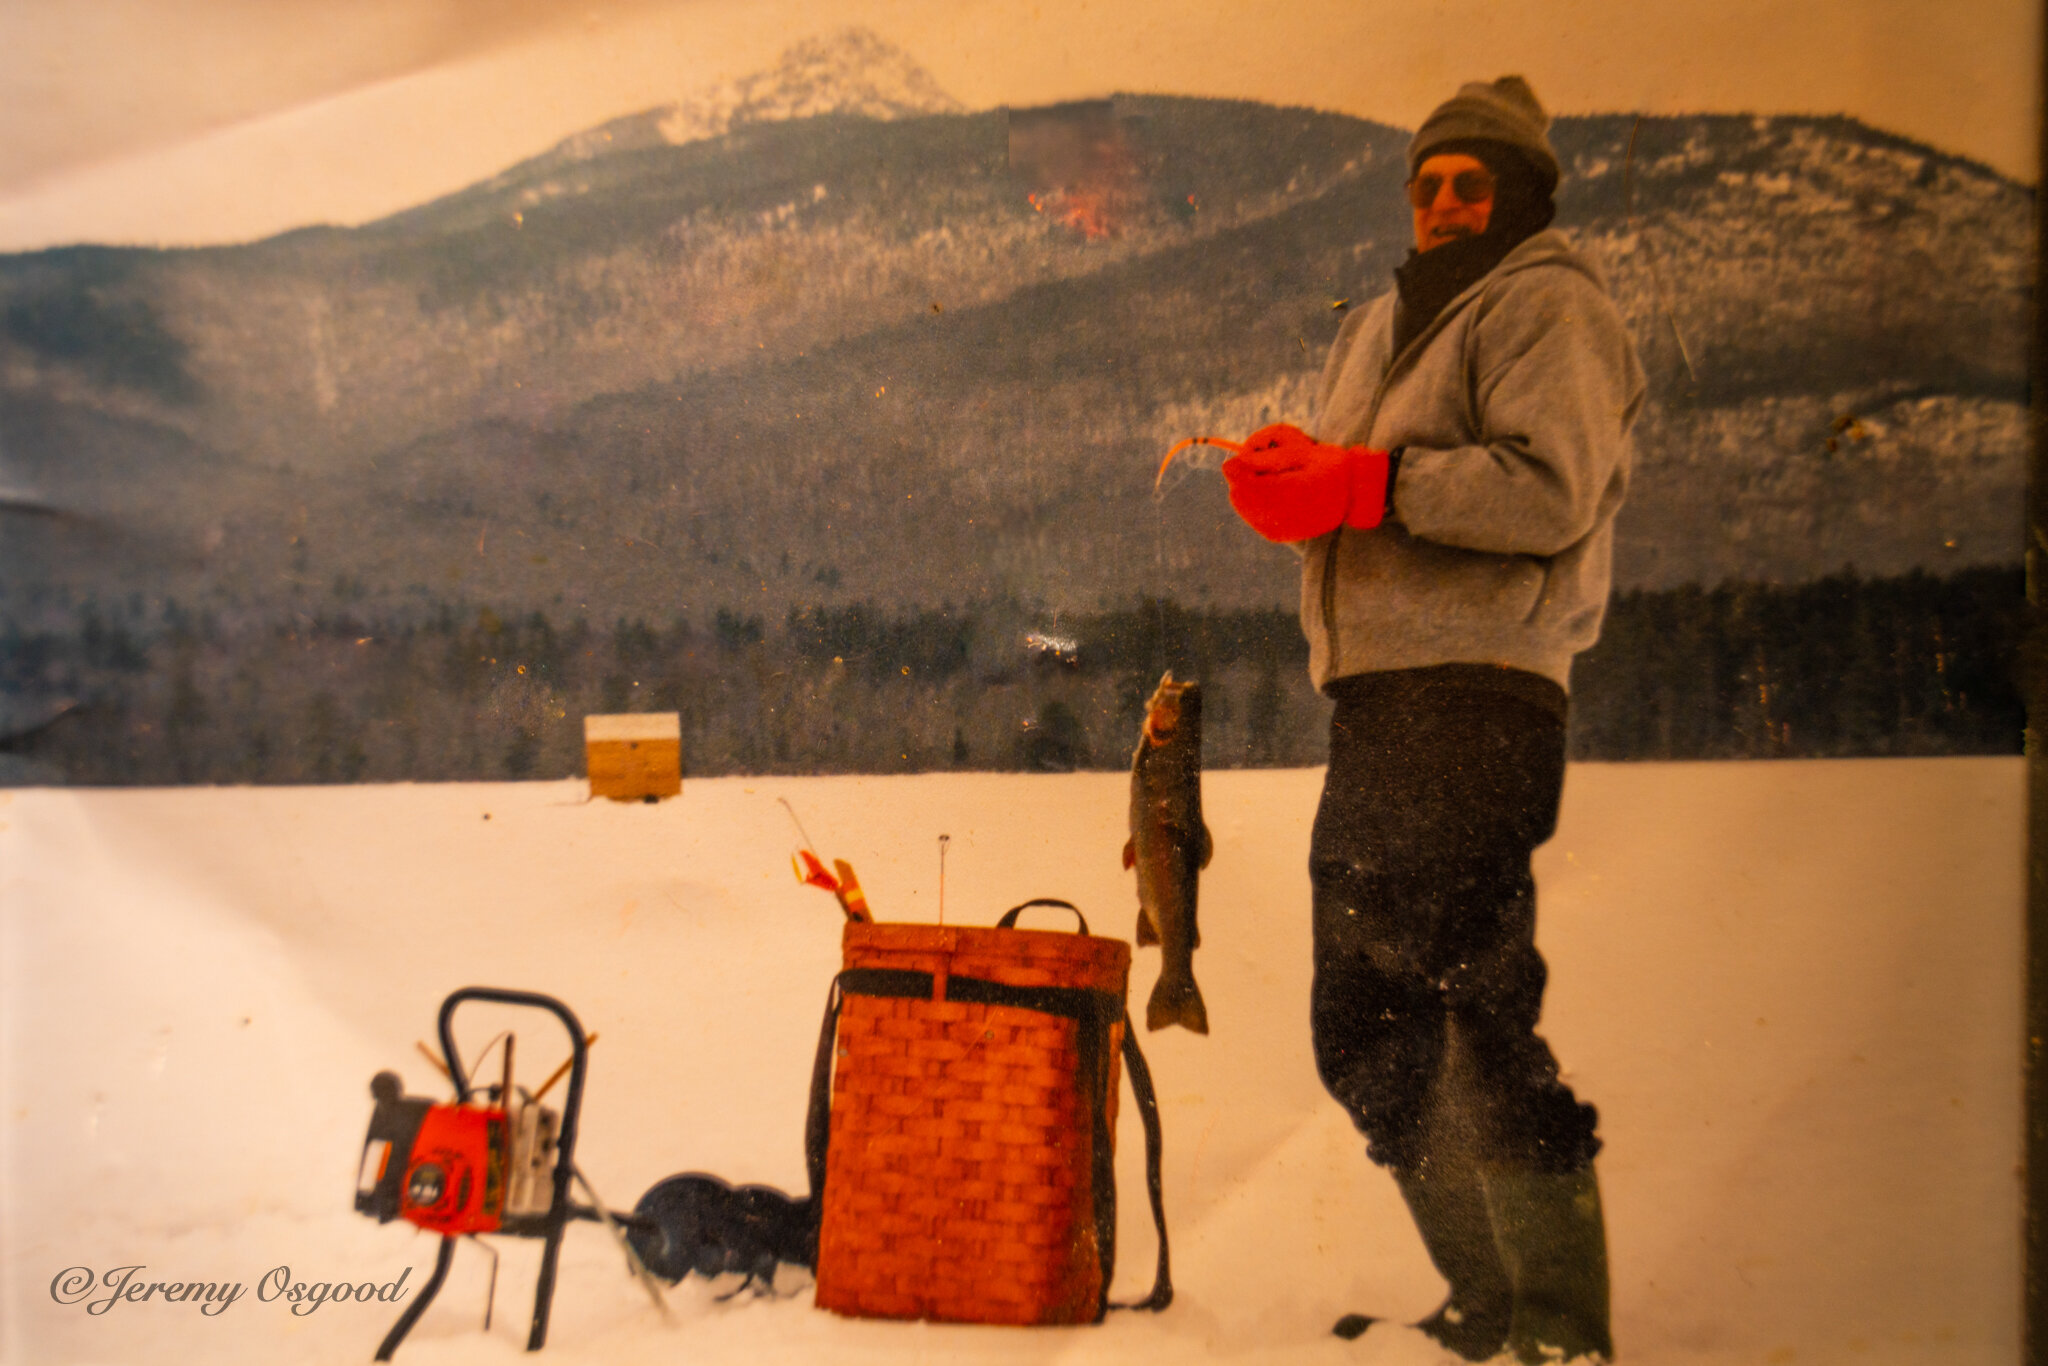 Photo of a photo taken back in the 1990’s ice fishing at Chocorua Lake. The fish house in the back was built by my brothers, Grandpa Tinker, and I, at his home in West Ossipee. He was a ridge-runner and storyteller, an inspirational force behind t…